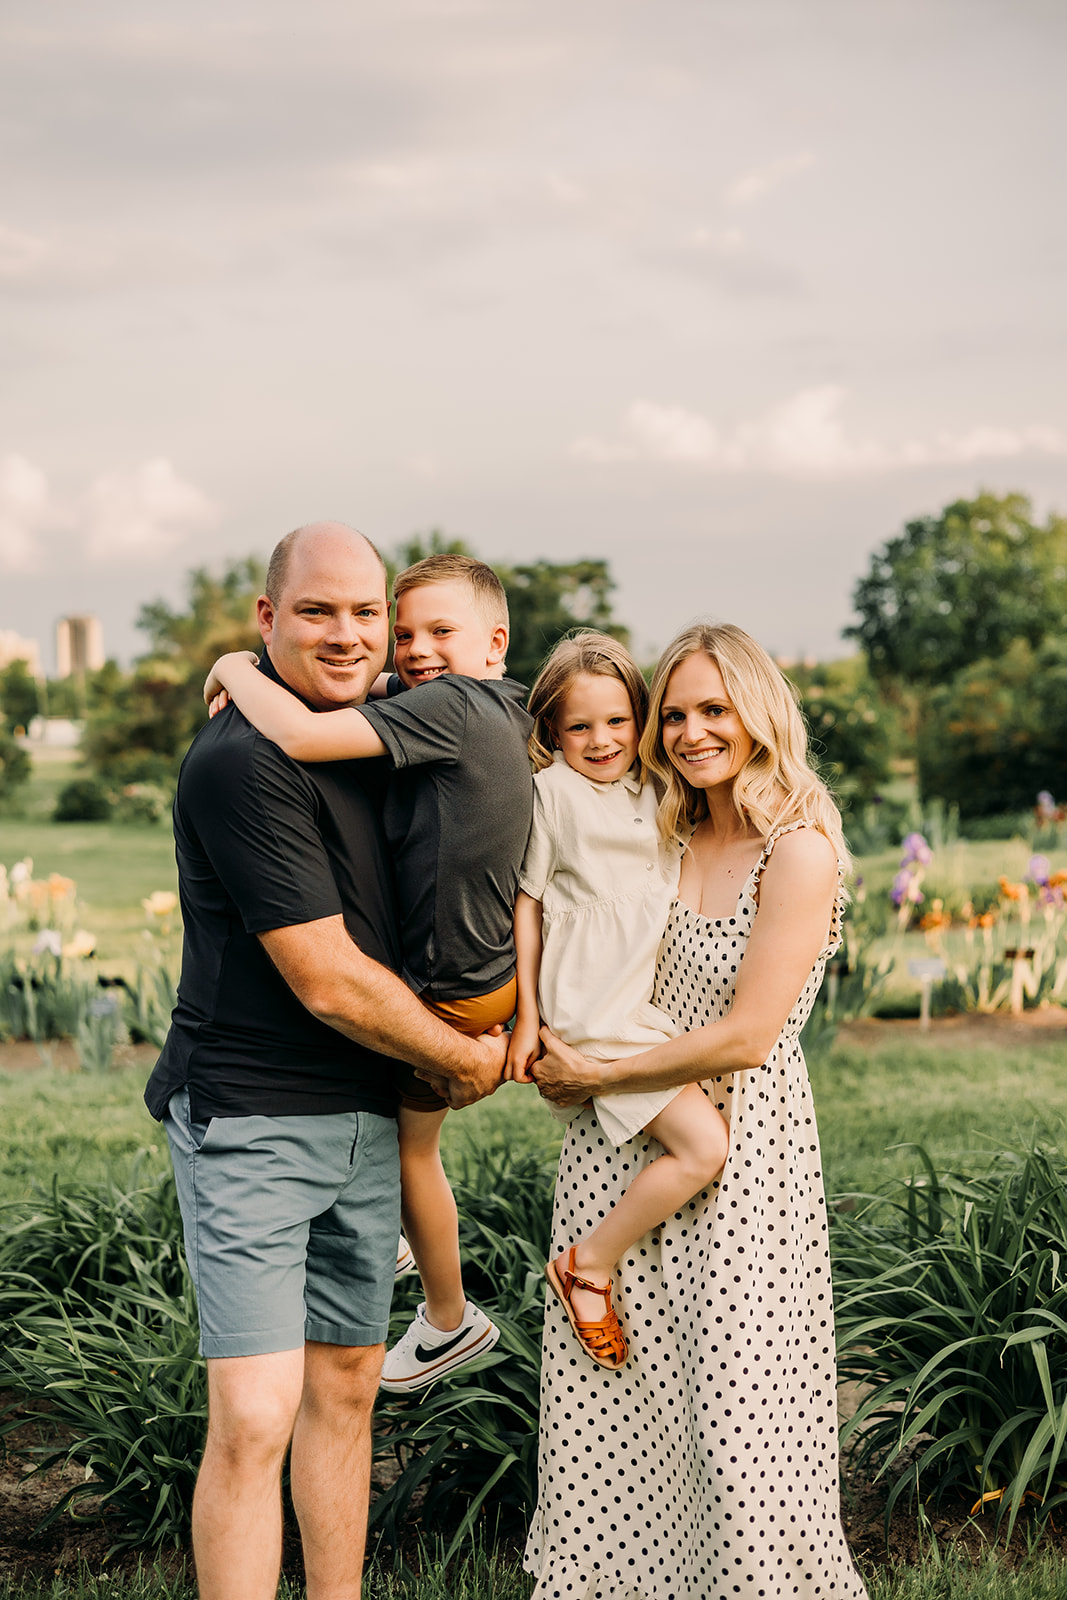 Ottawa Fields create a magical ambiance for family portraits